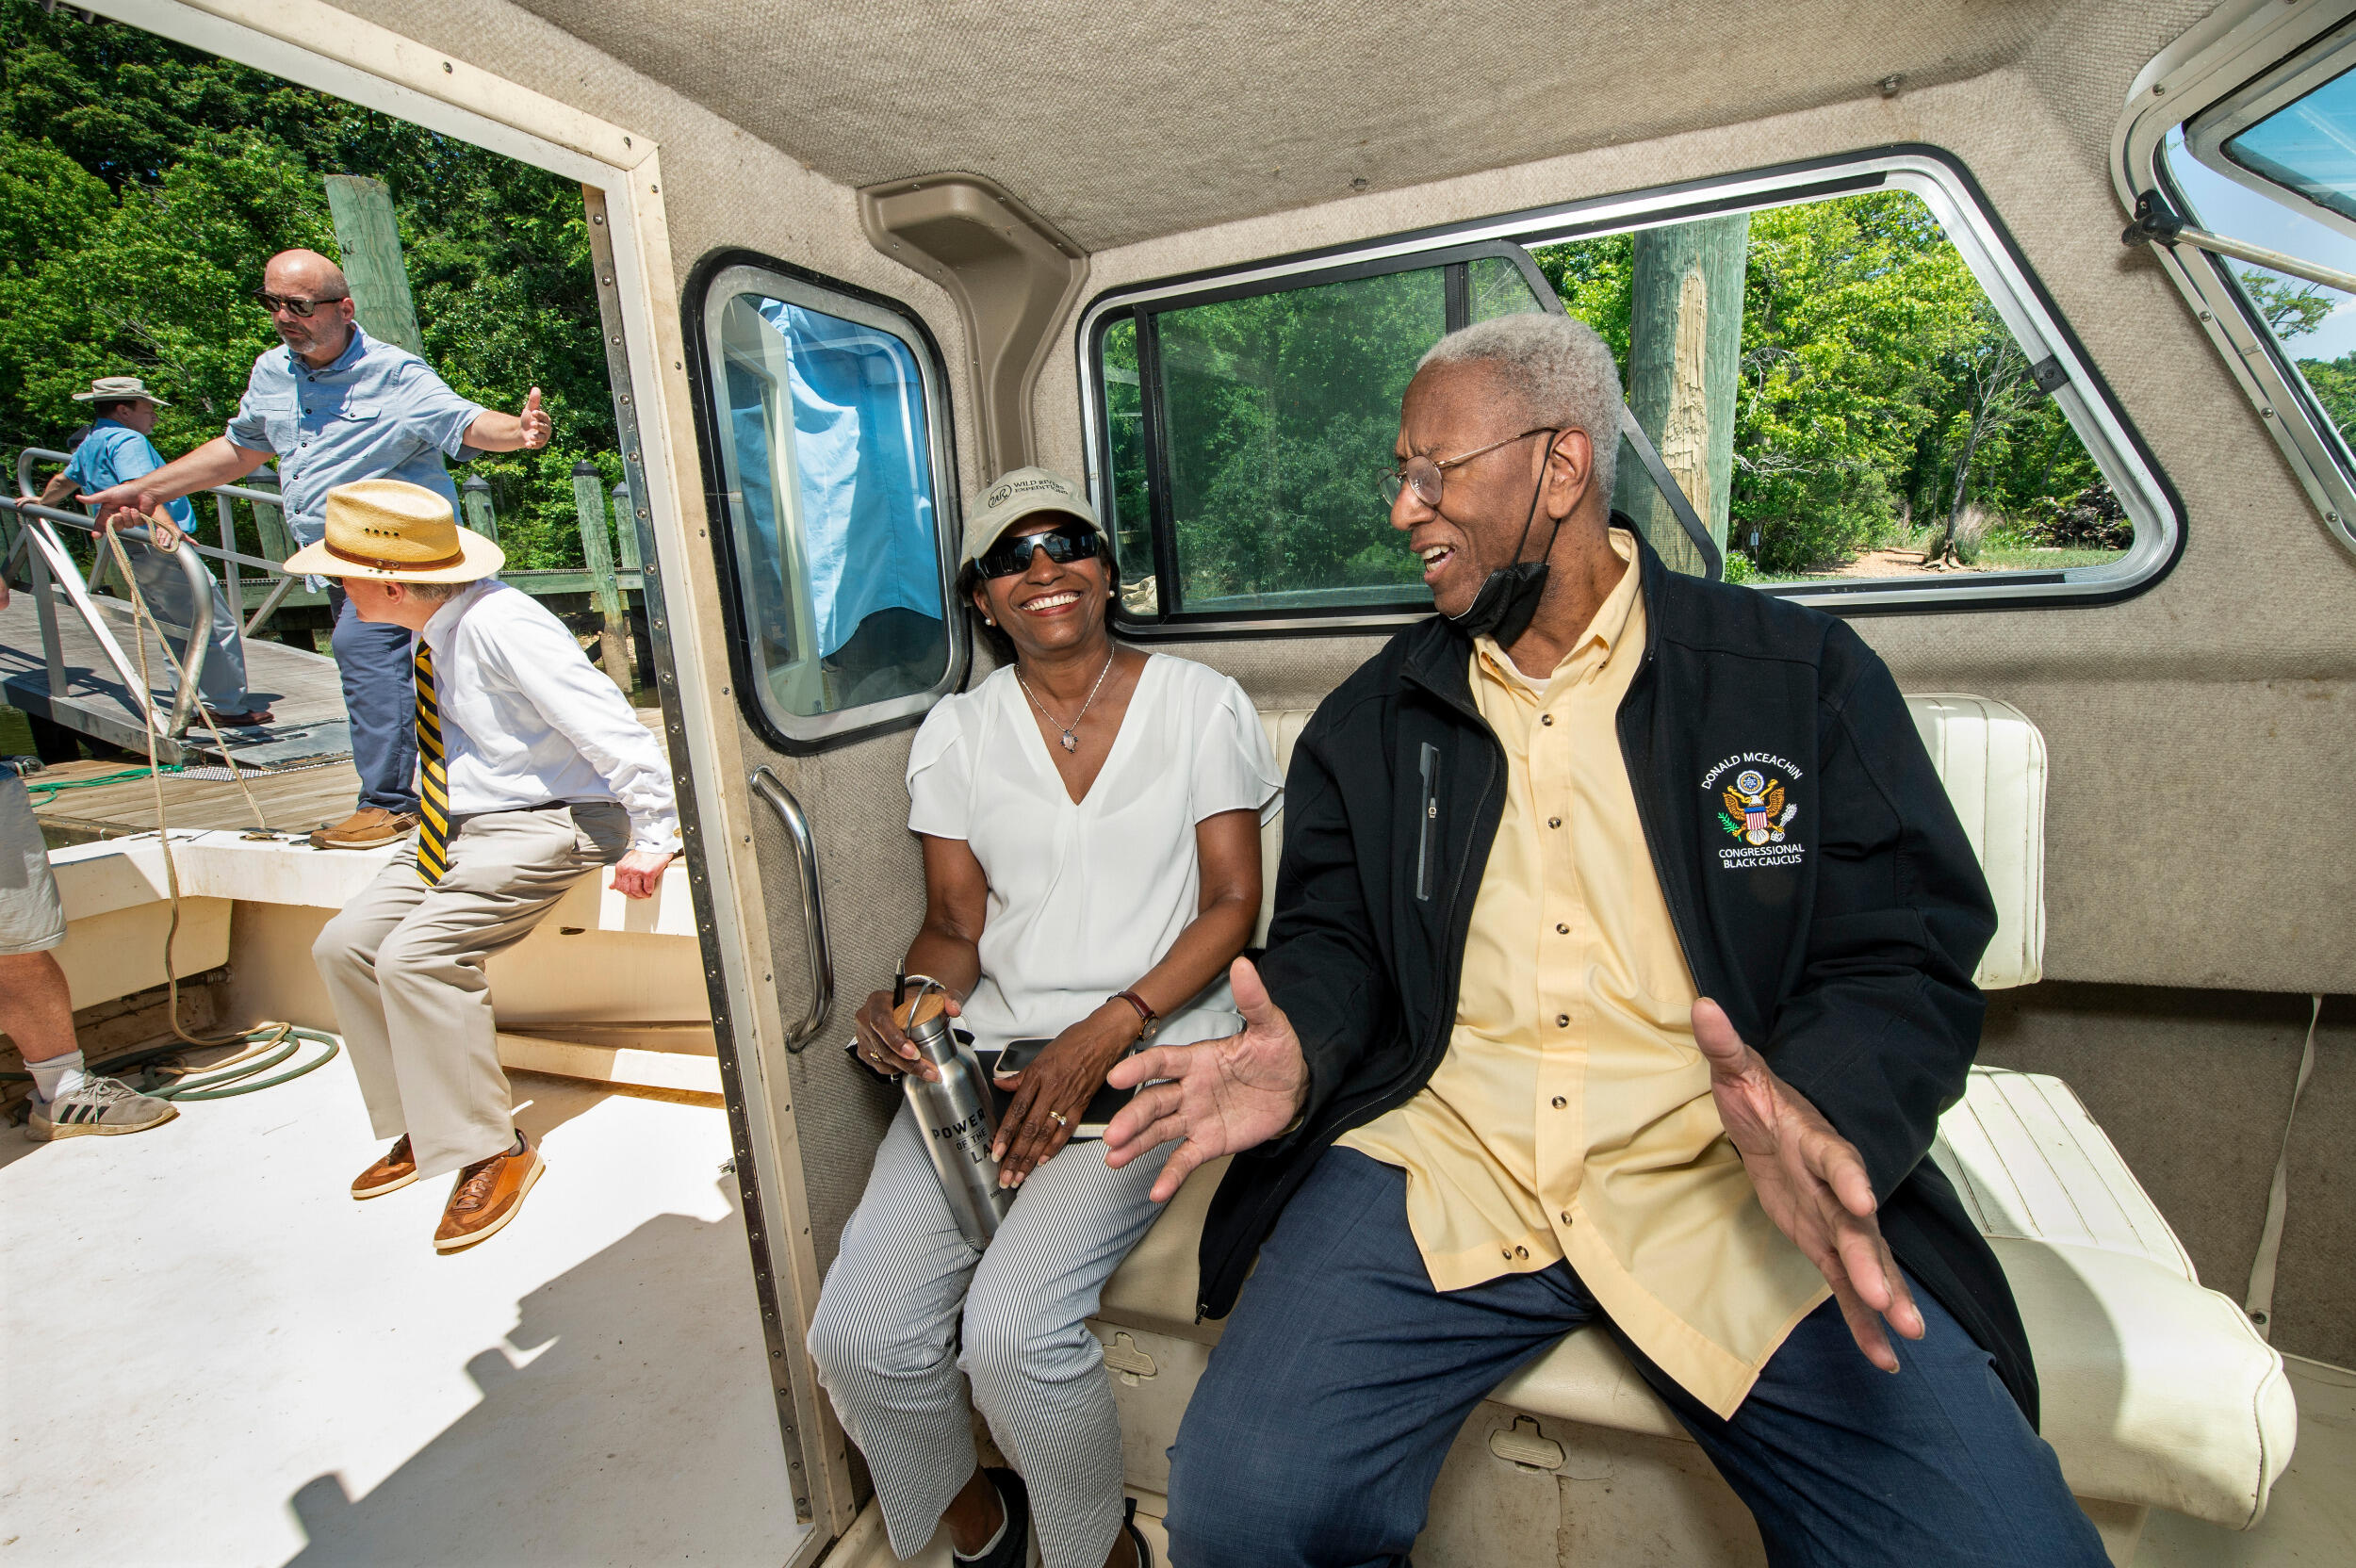 White House Council on Environmental Quality Chair Brenda Mallory and U.S. Rep. A. Donald McEachin sitting on a boat and laughing.